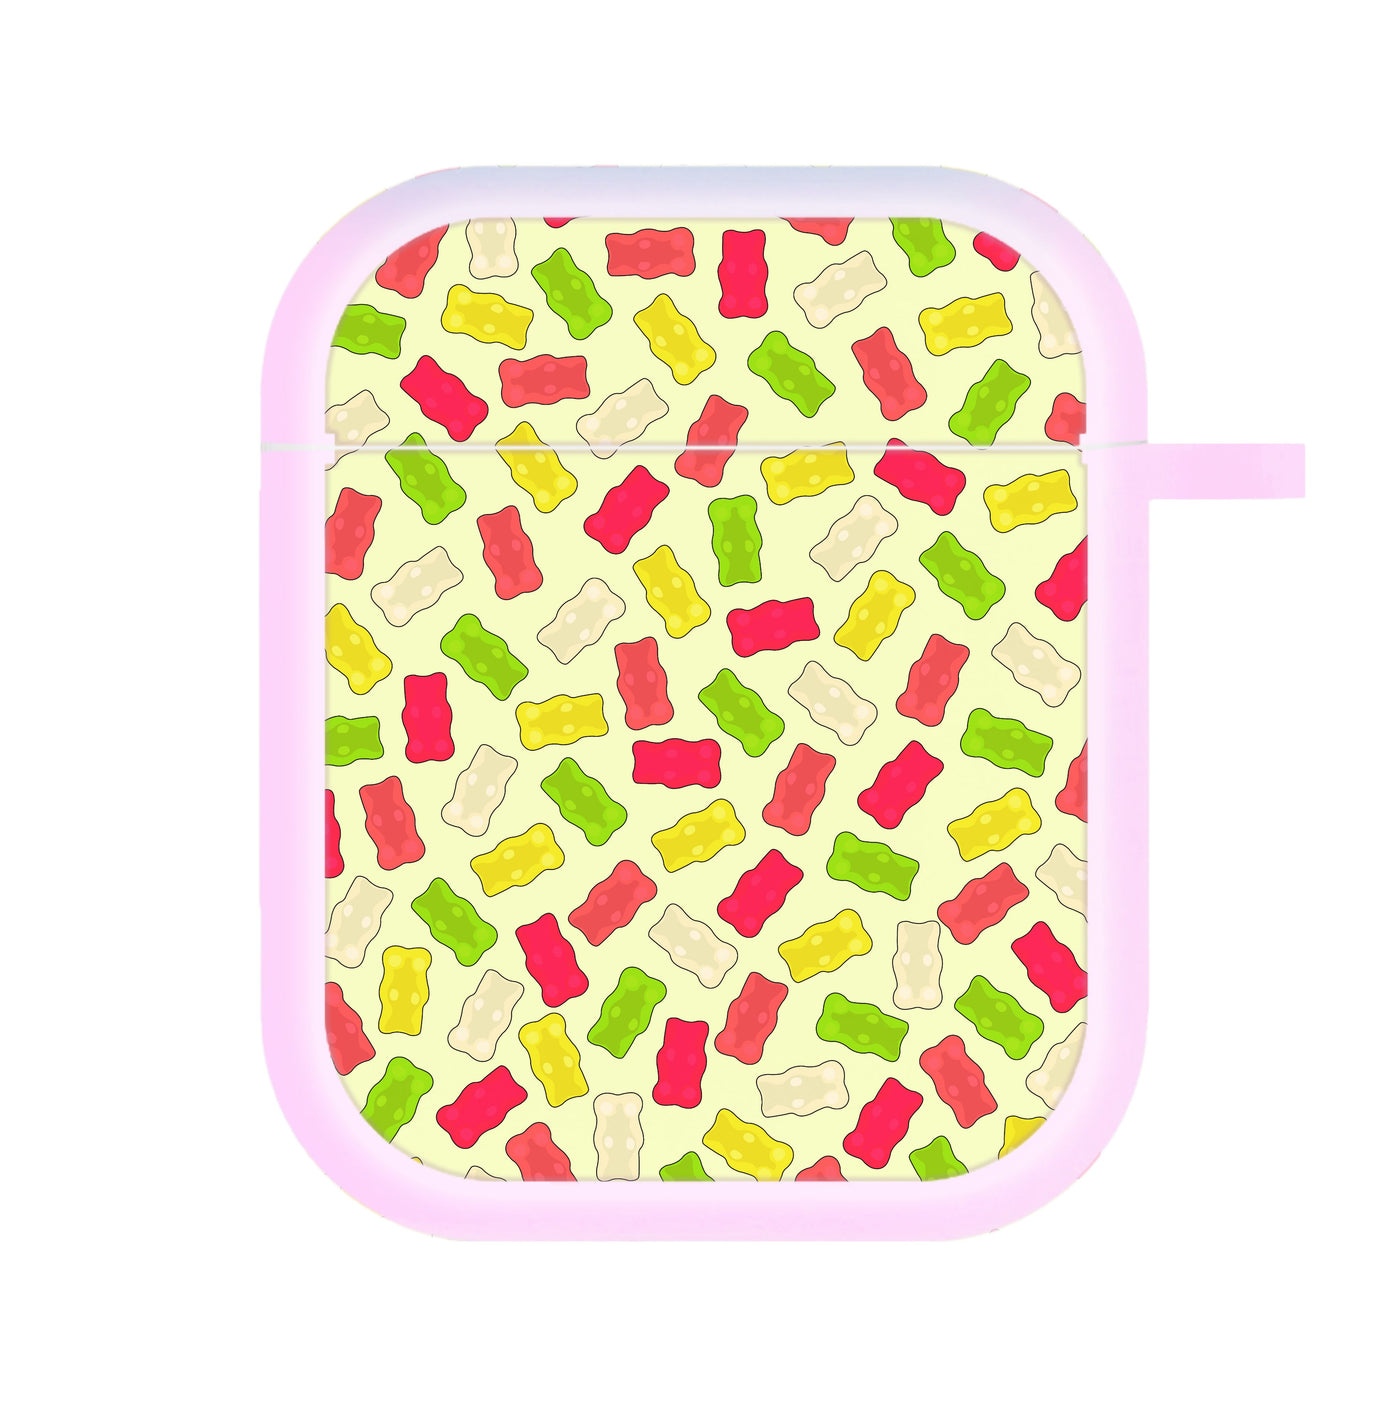 Gummy Bears - Sweets Patterns AirPods Case